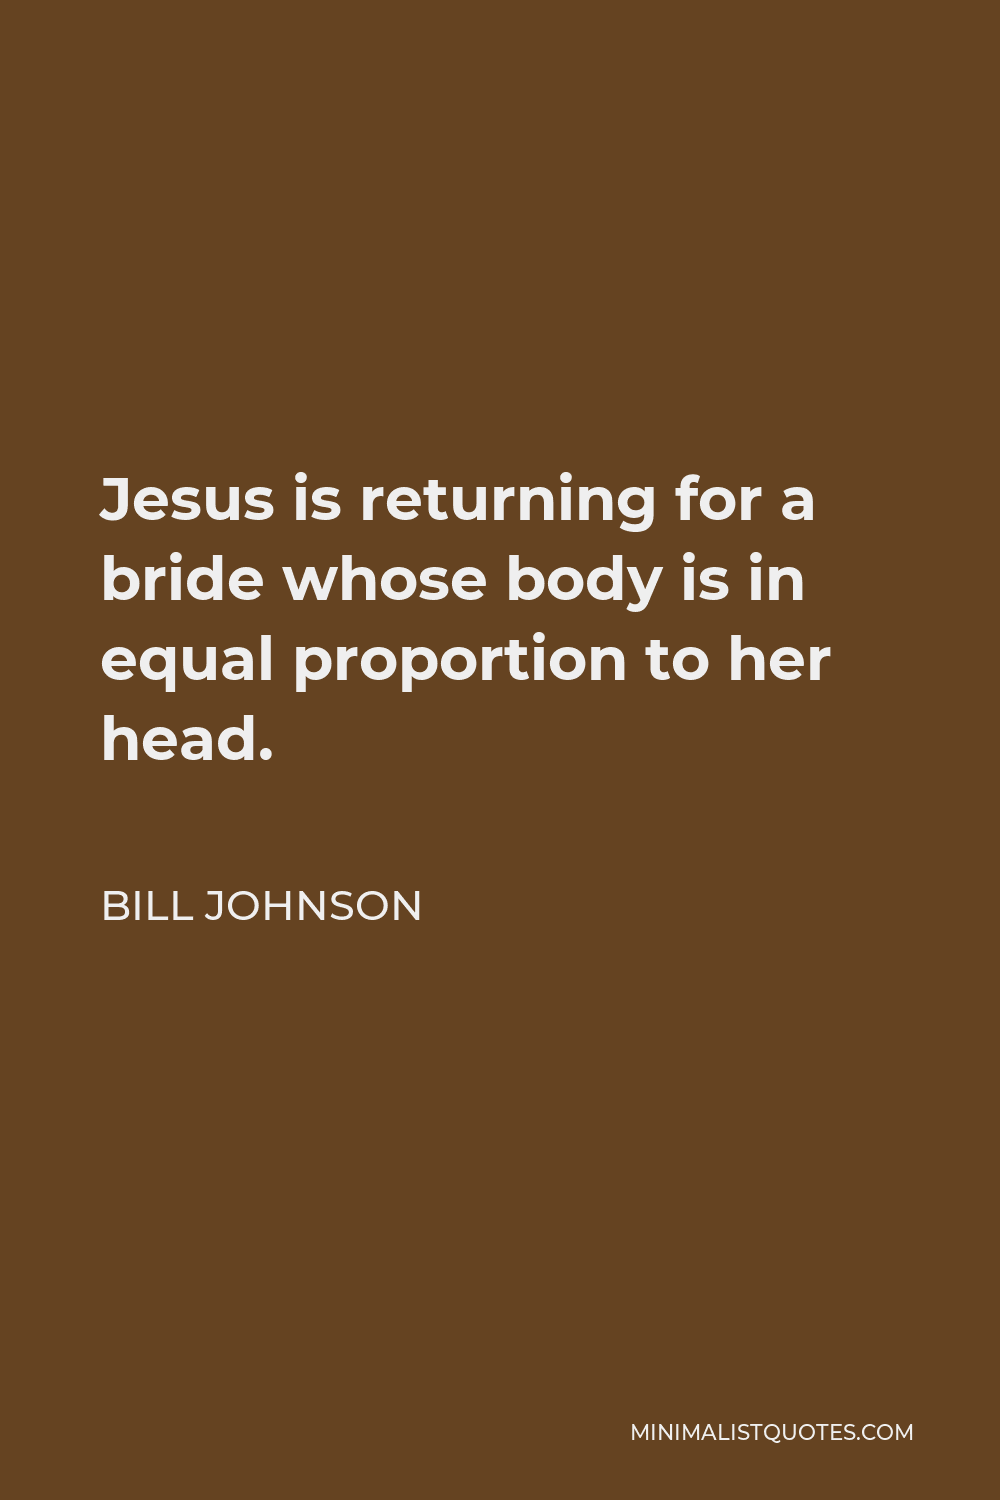 Bill Johnson Quote - Jesus is returning for a bride whose body is in equal proportion to her head.